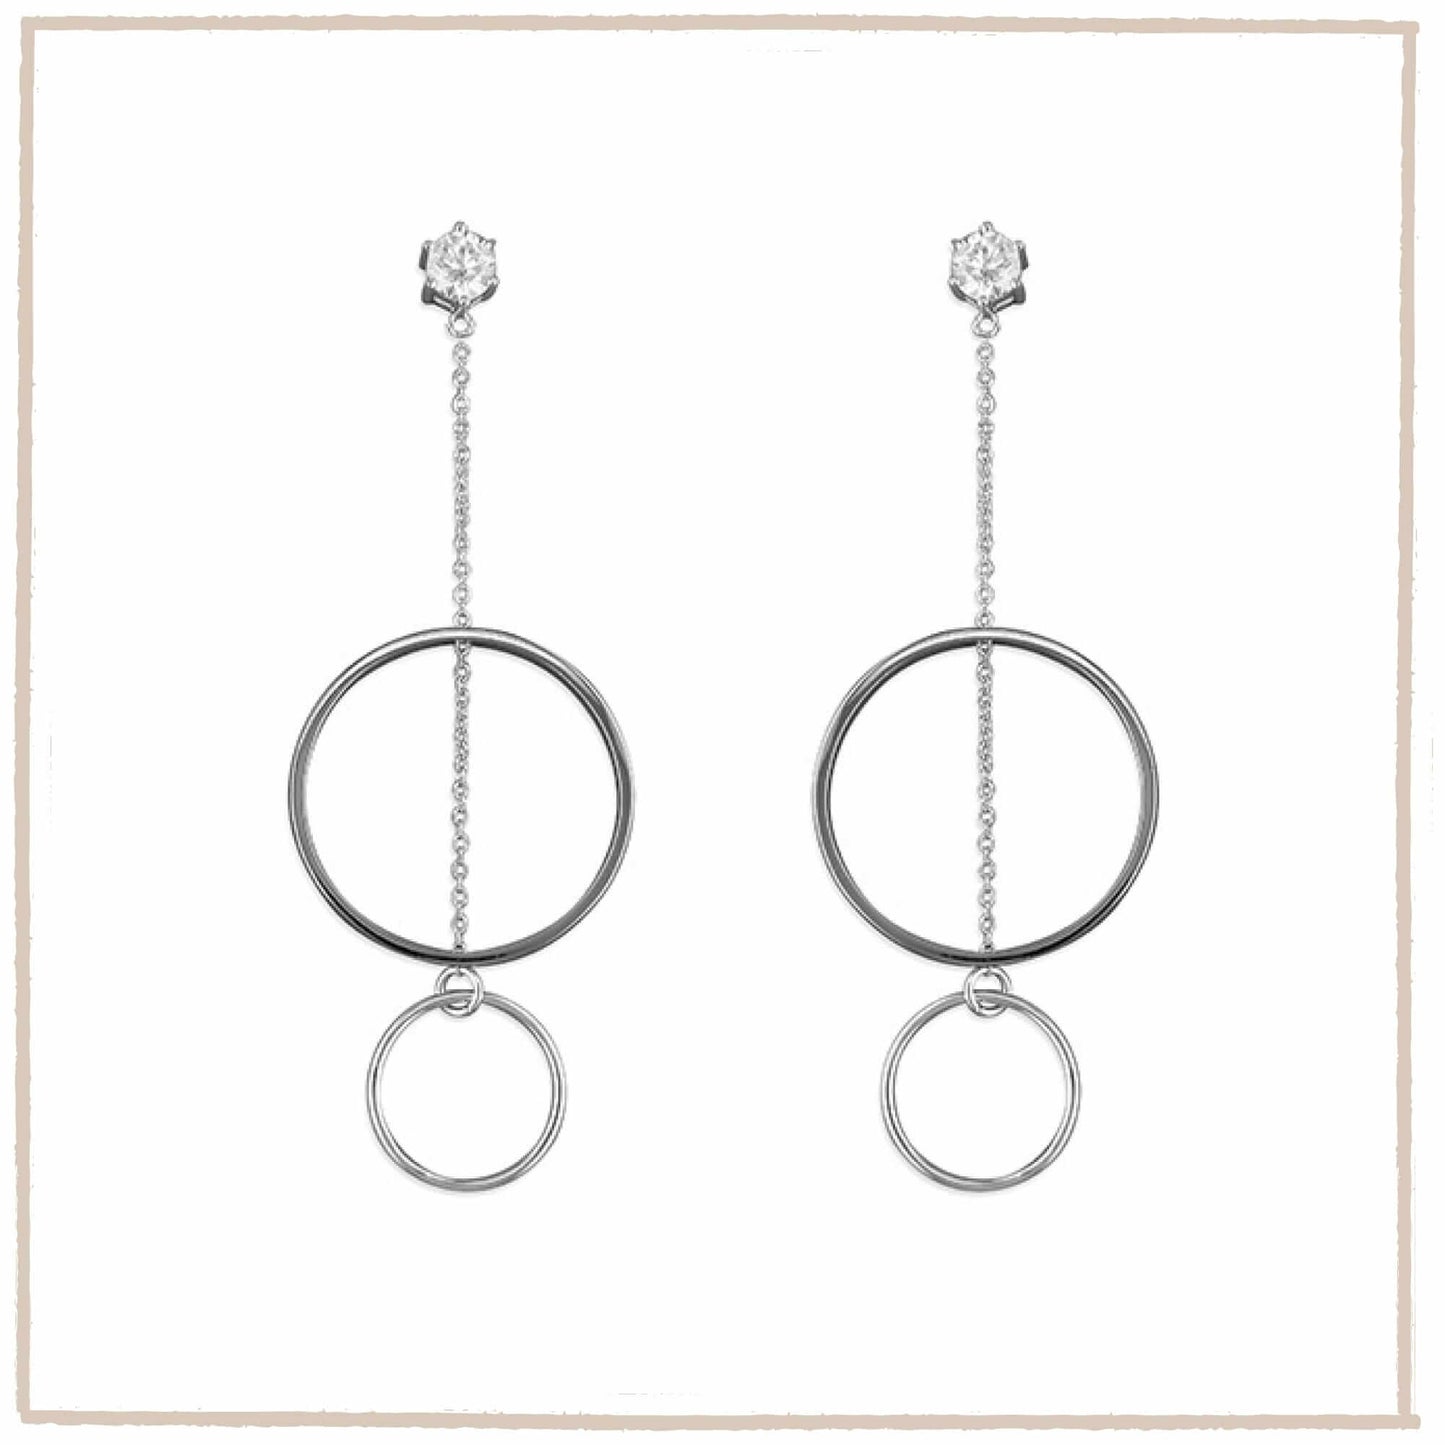 Suspended Circle Sterling Silver Solitaire Drop Earrings - Twelve Silver Trees